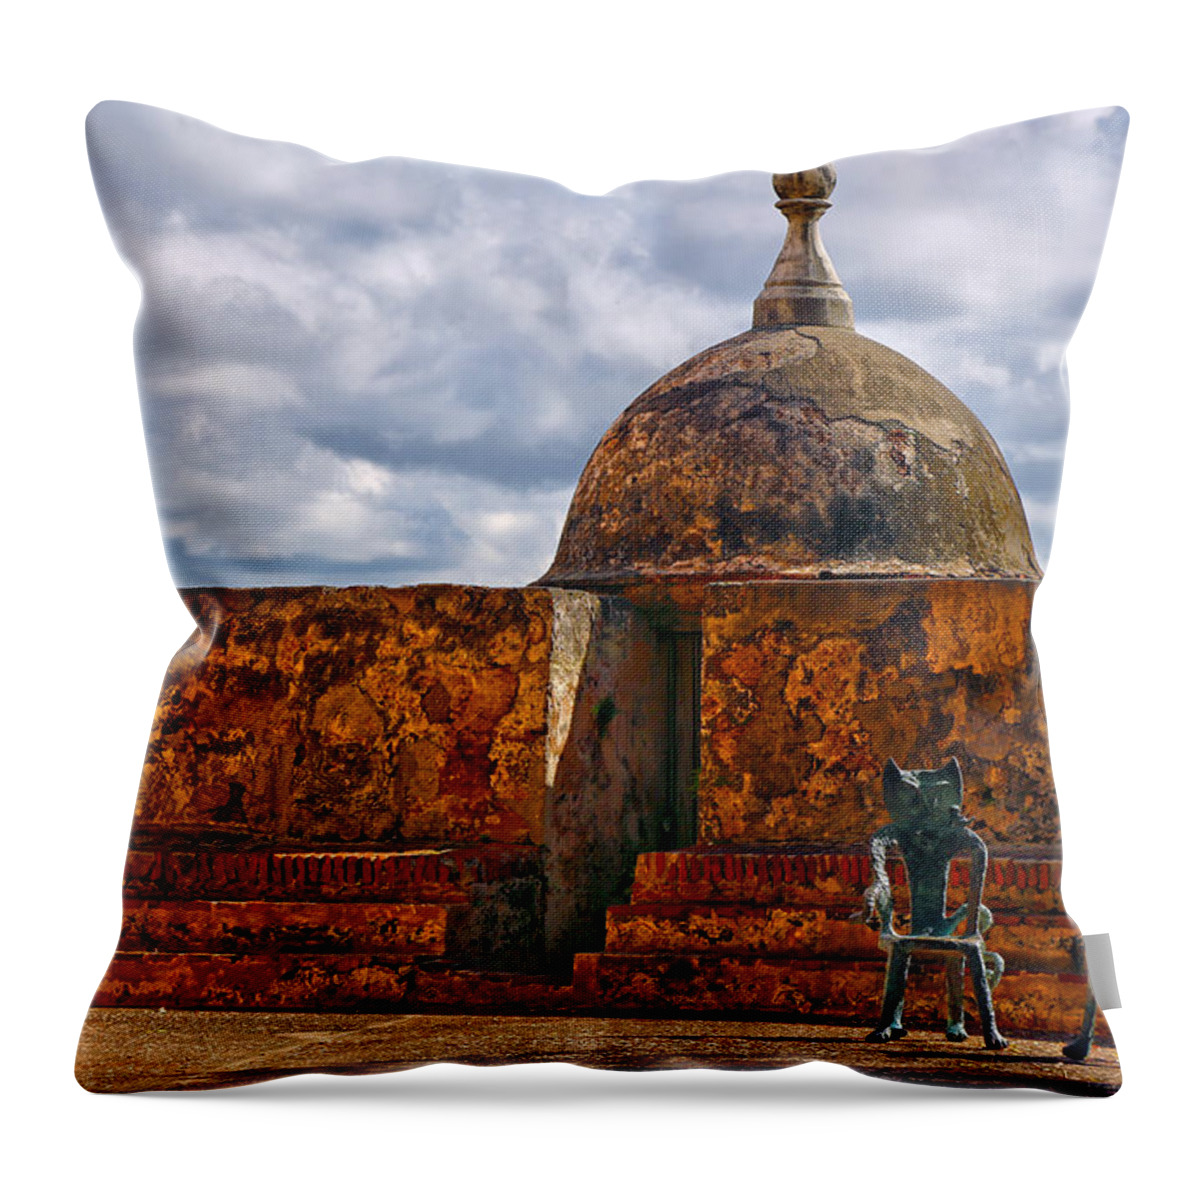 The Spanish Colonial Style Of Architecture Dominated In The Early Spanish Colonies Of North And South America Throw Pillow featuring the photograph Spanish Colonial Architecture by Mitch Cat